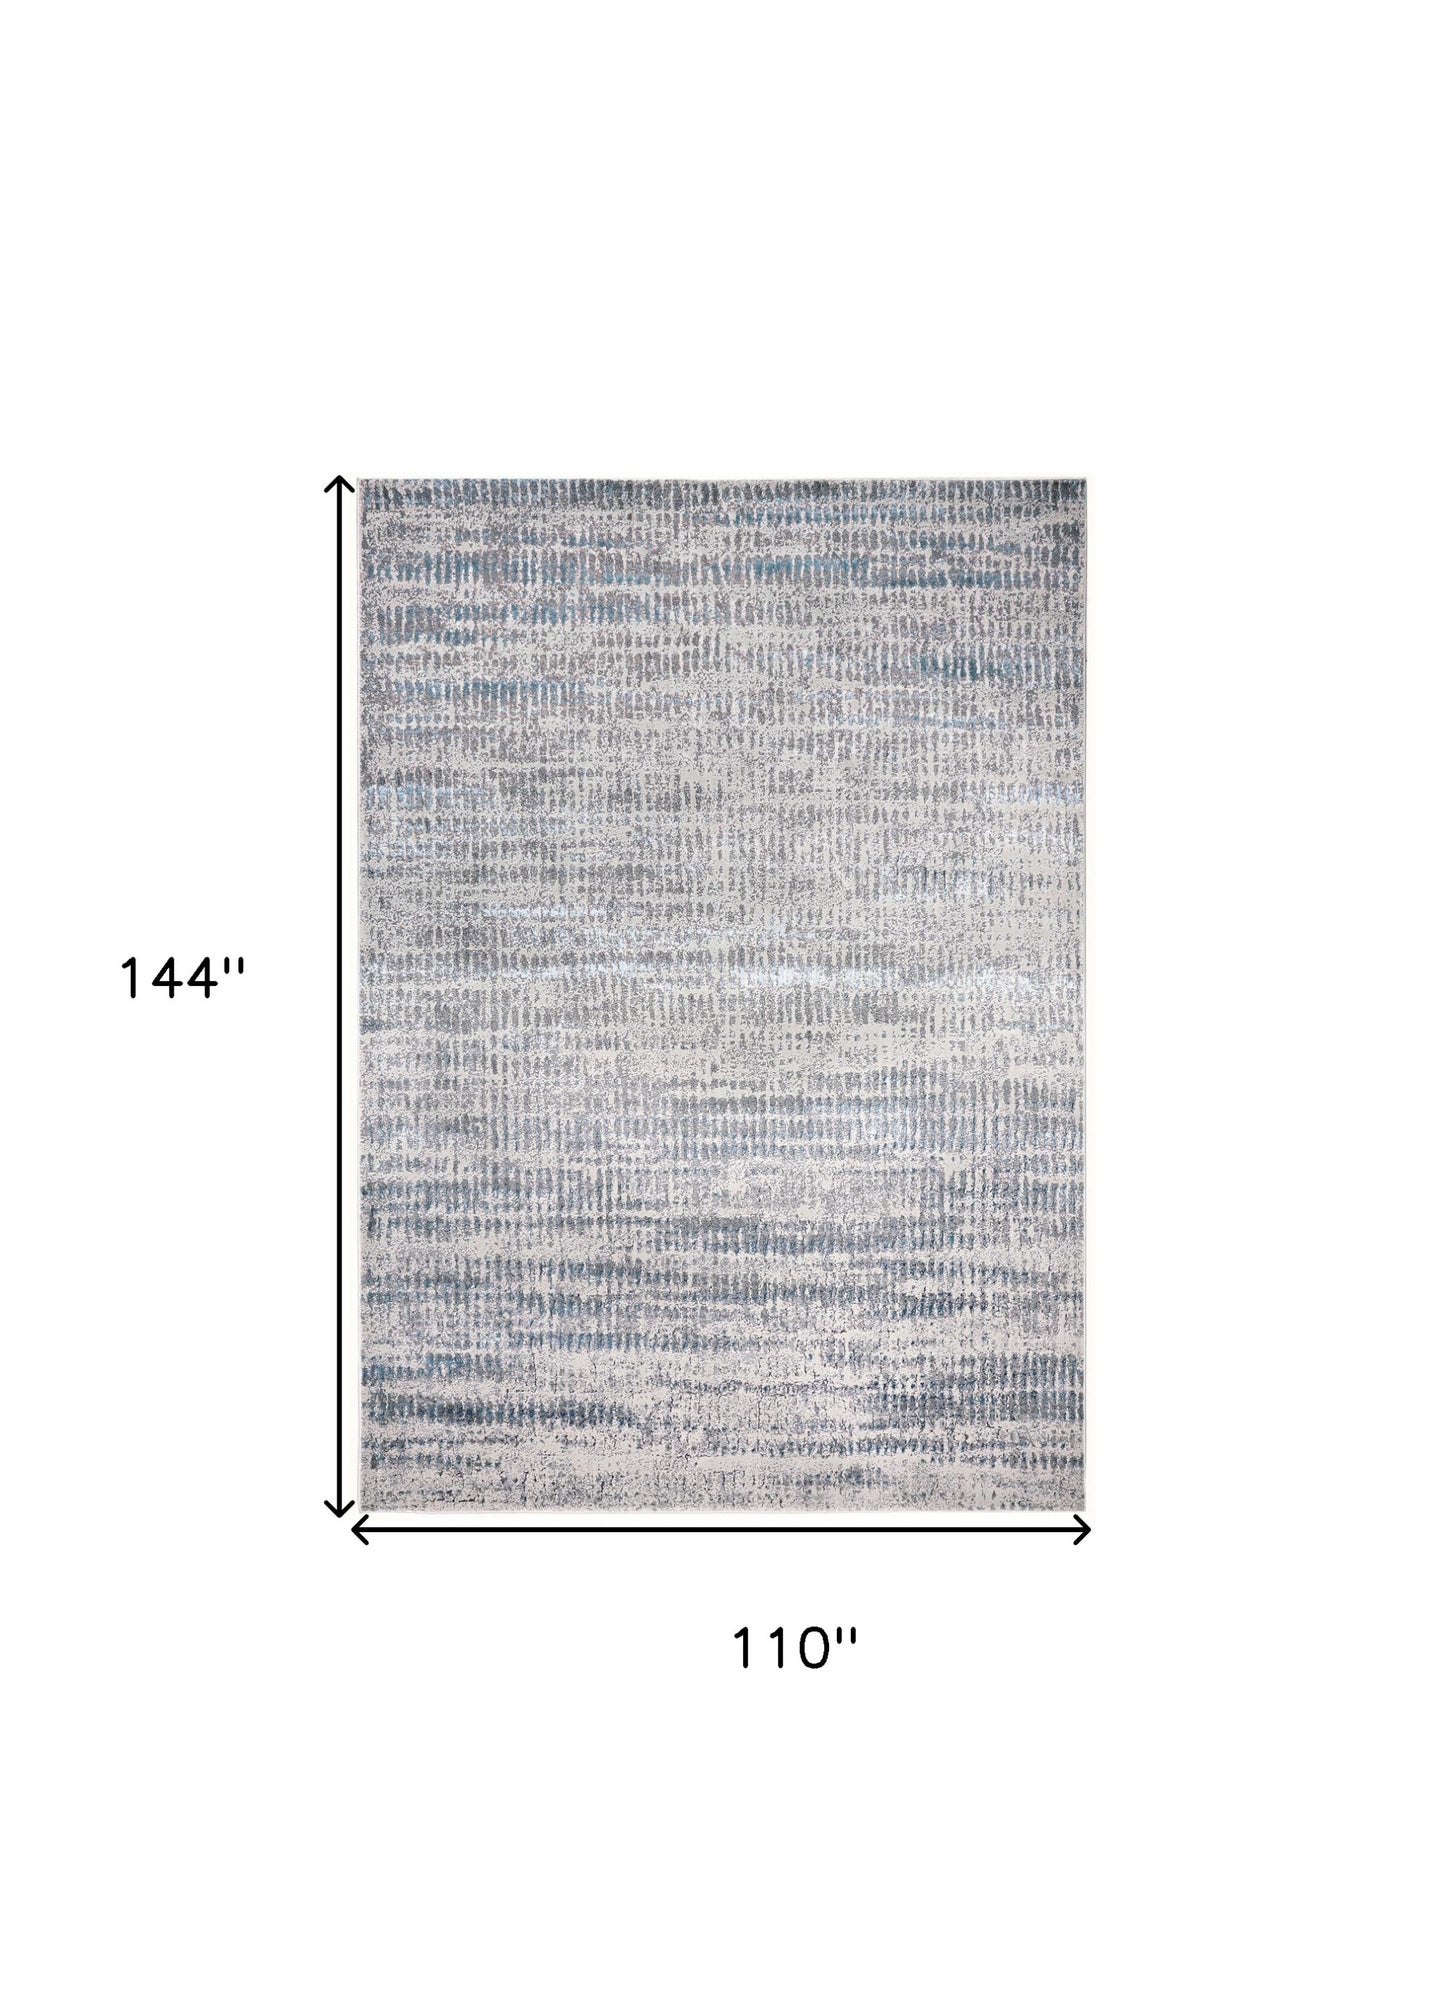 4' X 6' Blue Gray And Ivory Abstract Area Rug